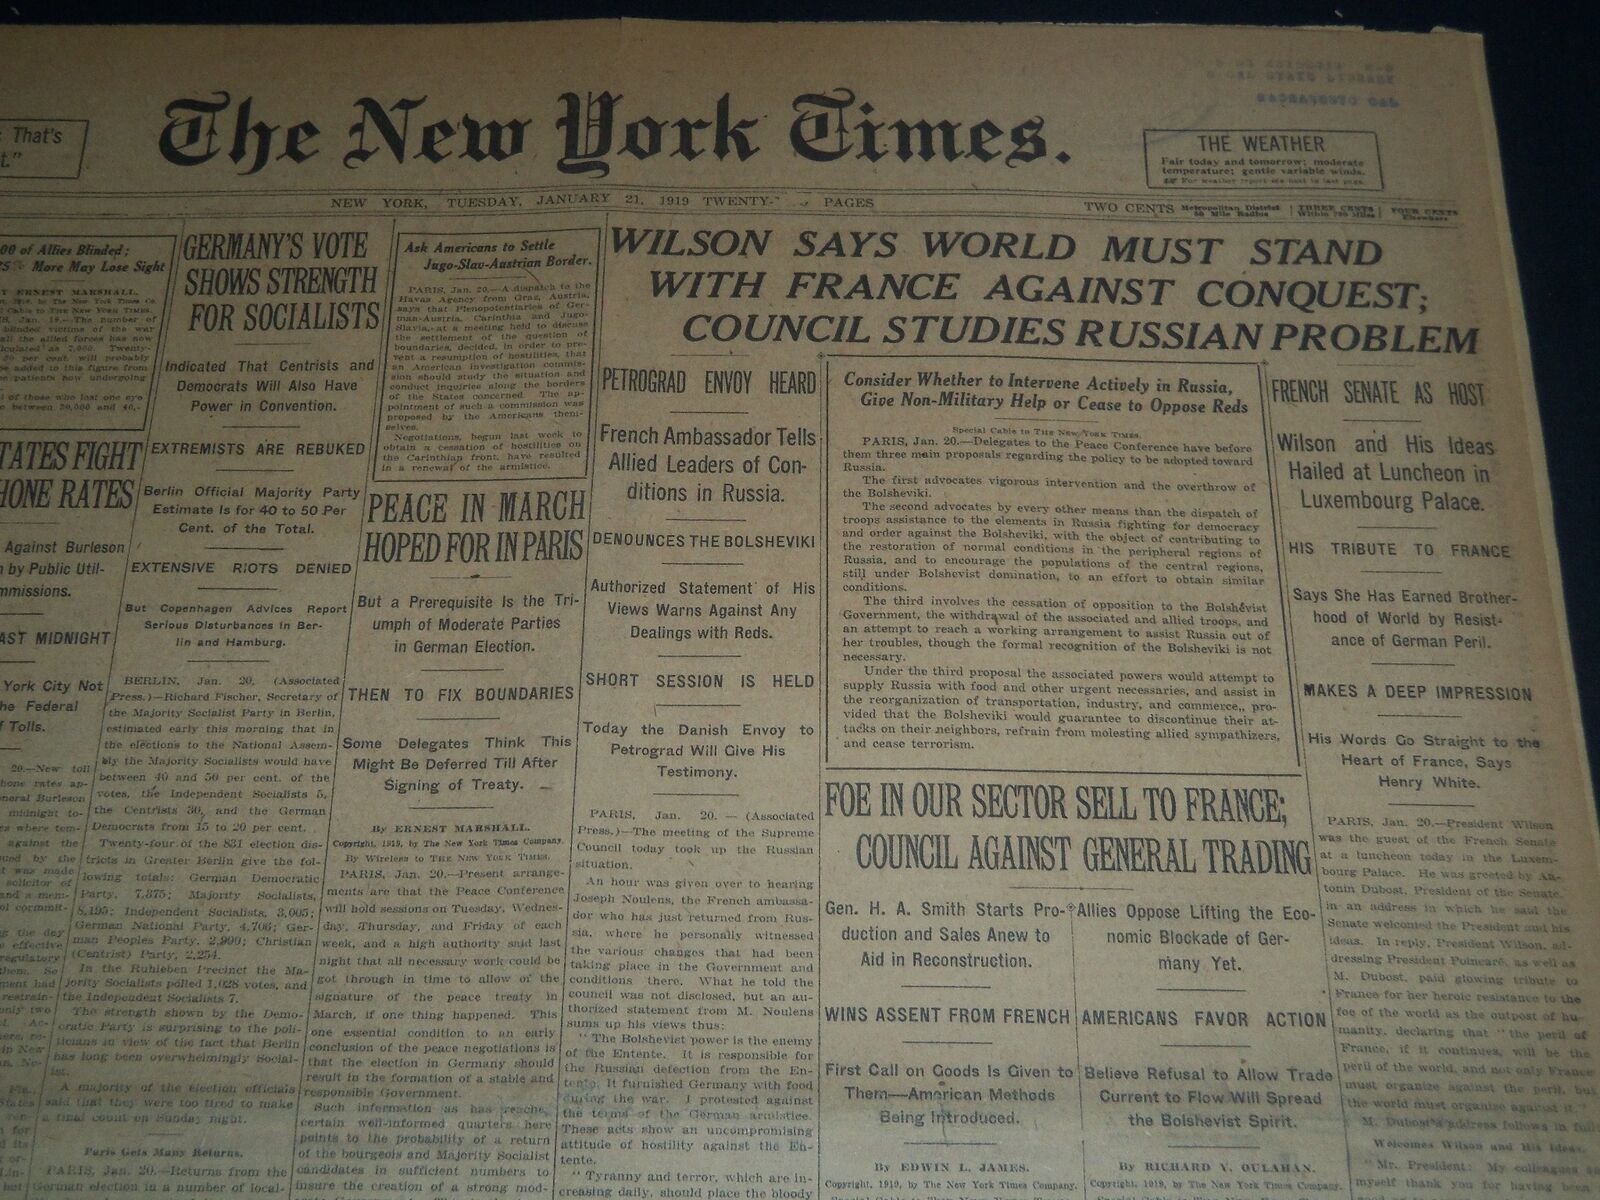 1919 JANUARY 21 NEW YORK TIMES-WILSON SAYS WORLD MUST STAND WITH FRANCE- NT 7516